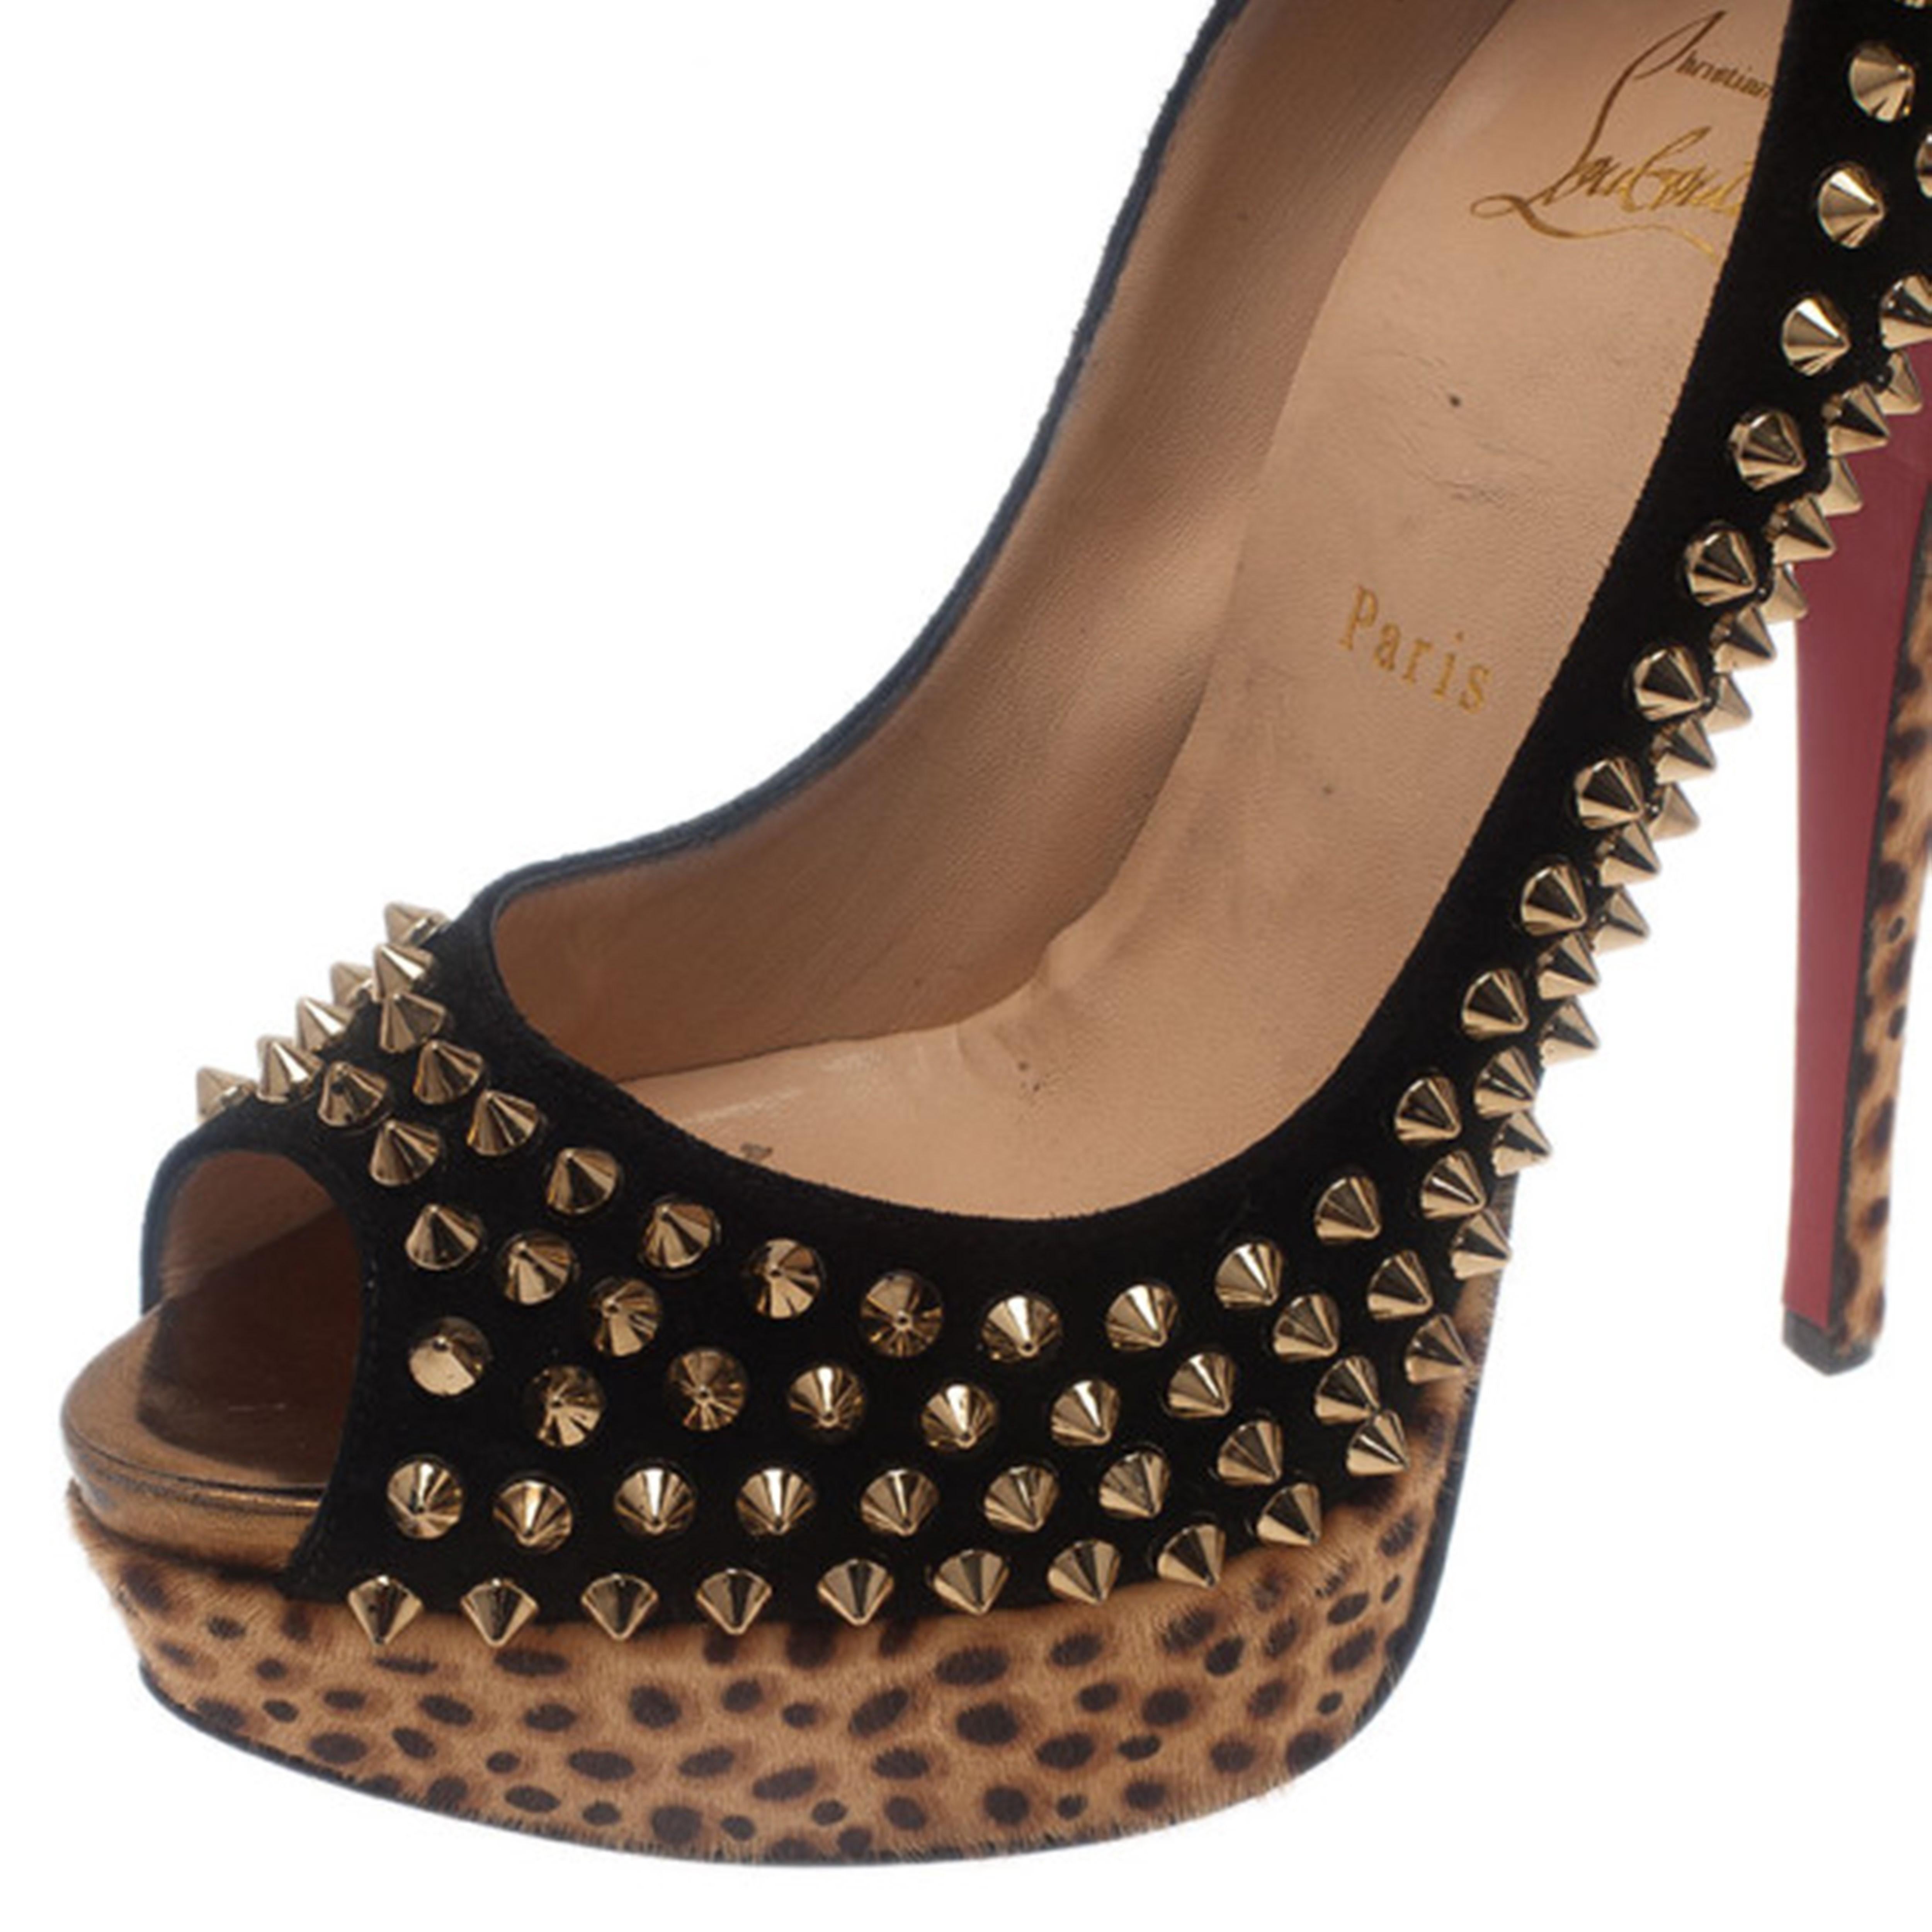 Christian Louboutin Black Suede Leopard Pony Hair Lady Peep Spikes Pumps Size 39 2